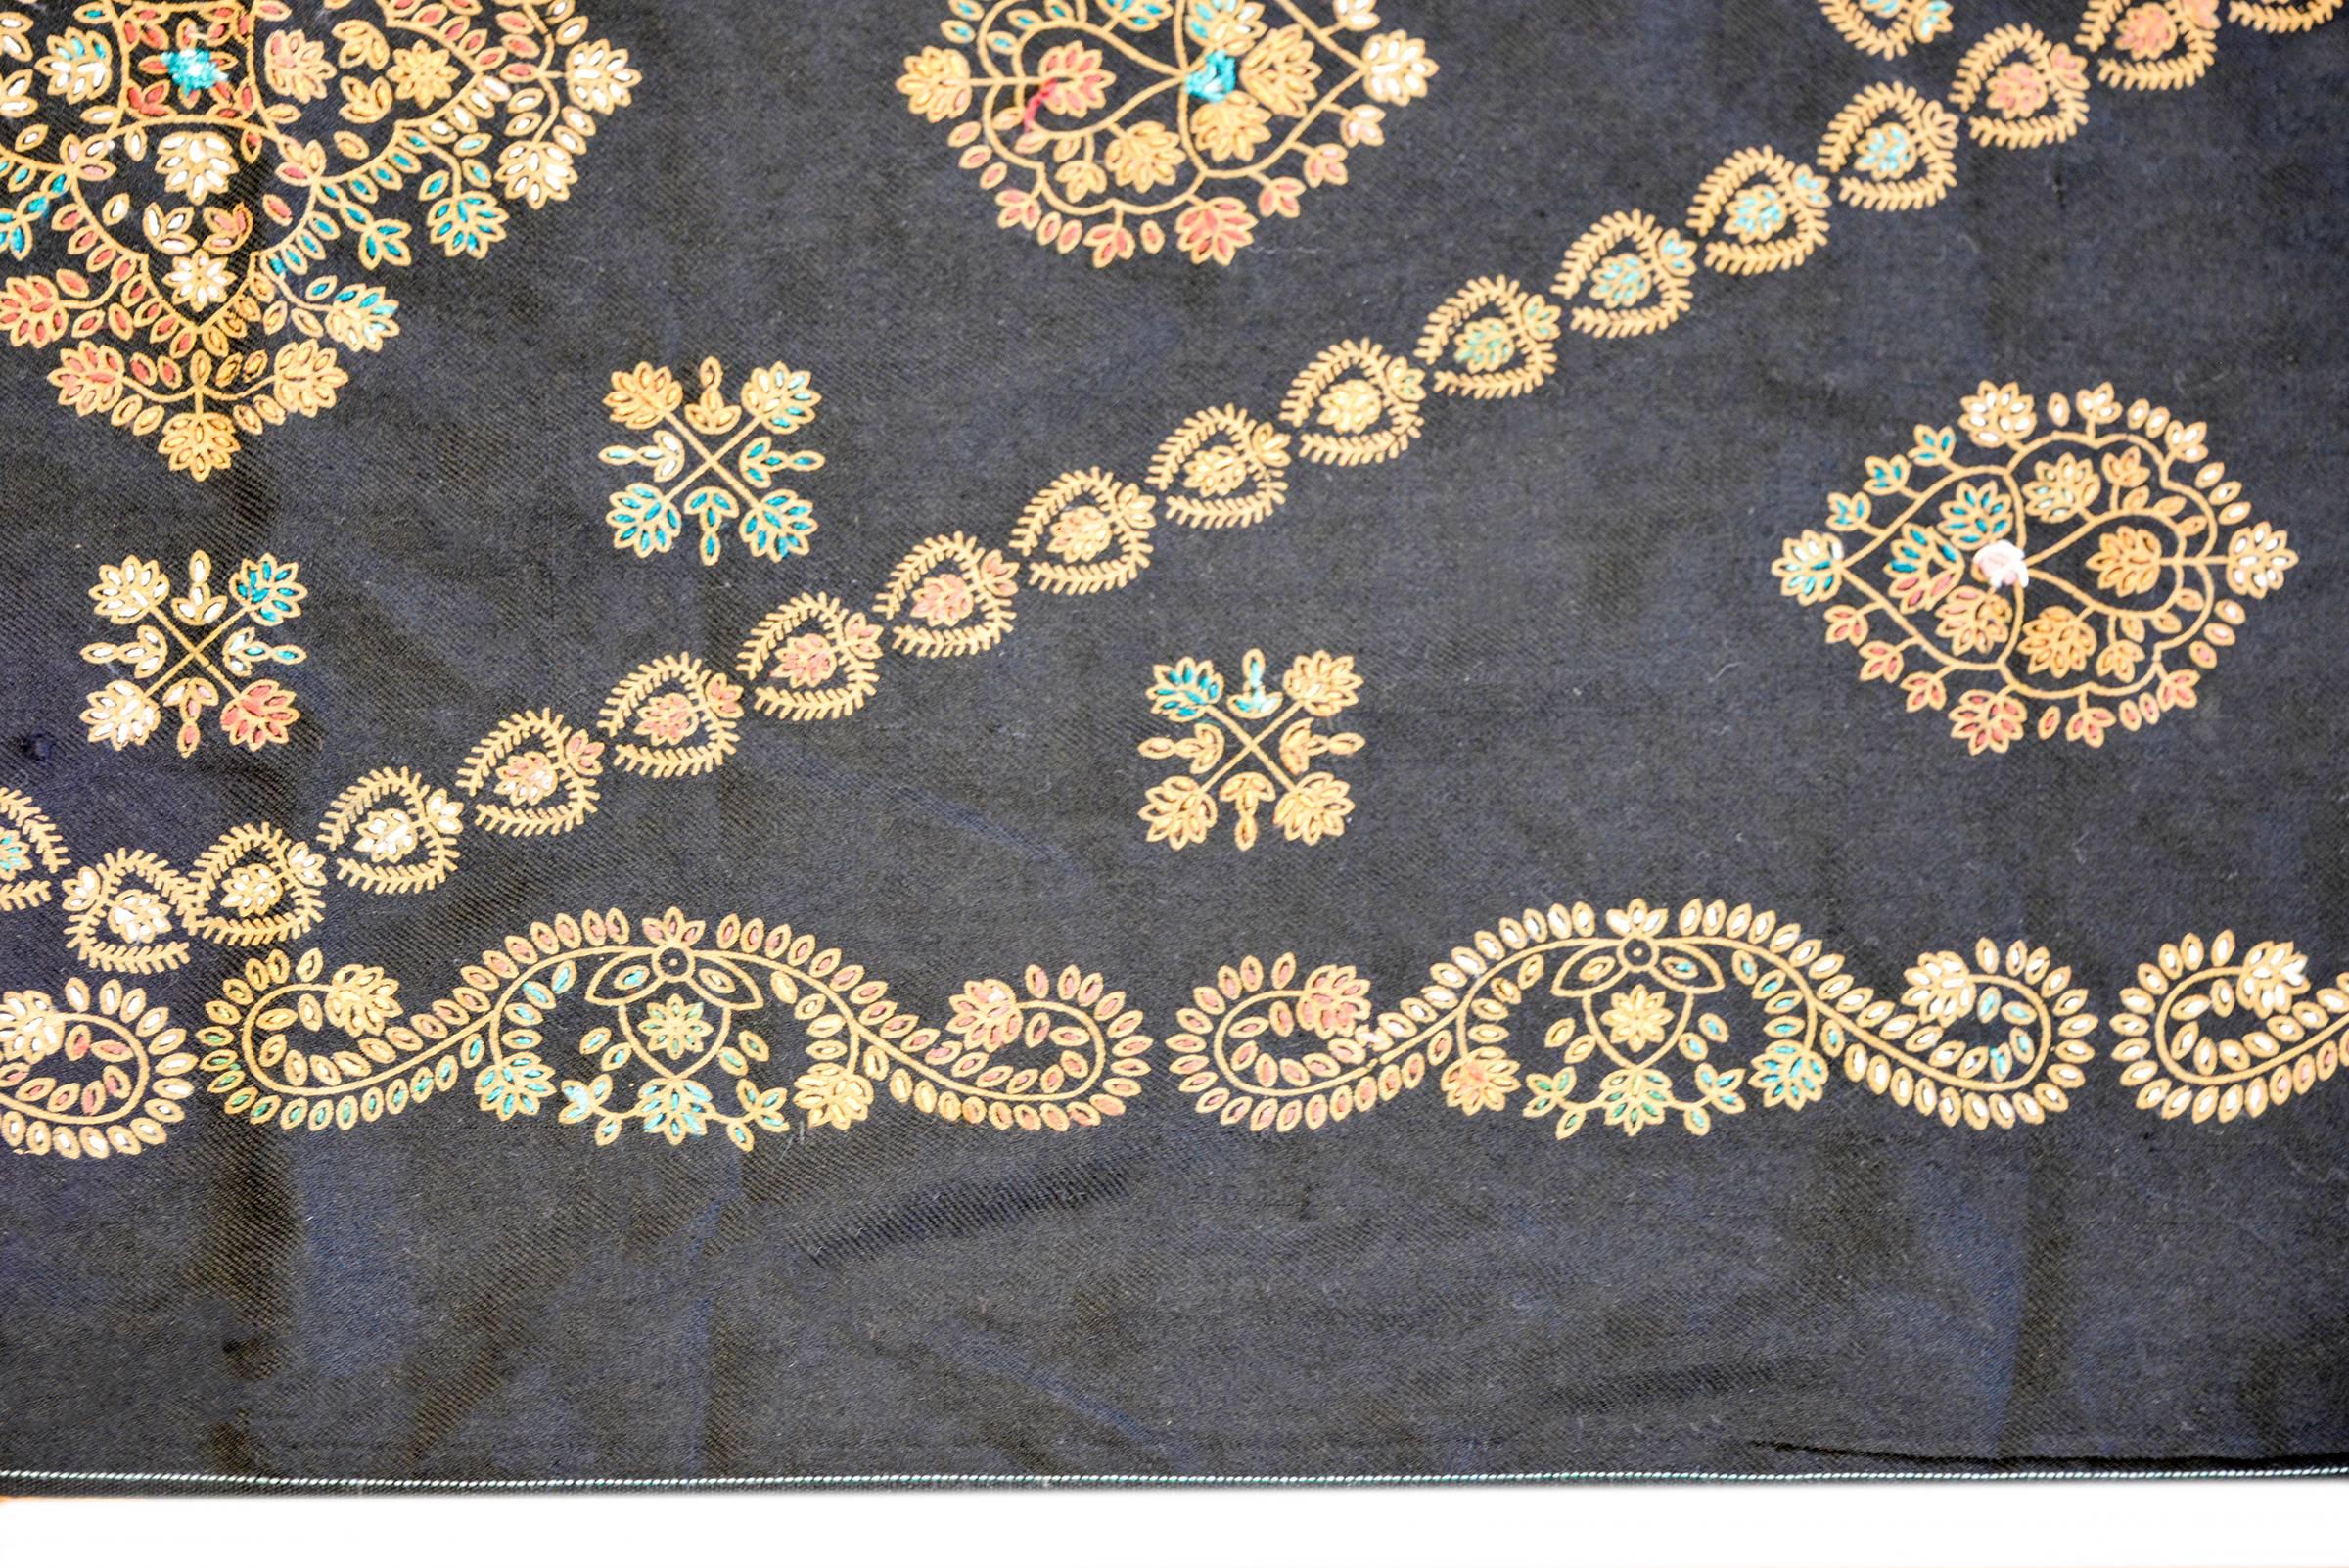 An expertly embroidered late 20th century Indian Suzani textile with green, gold, pink, and blue silk thread comprising a diamond form with stylized flowers across the black cotton ground.